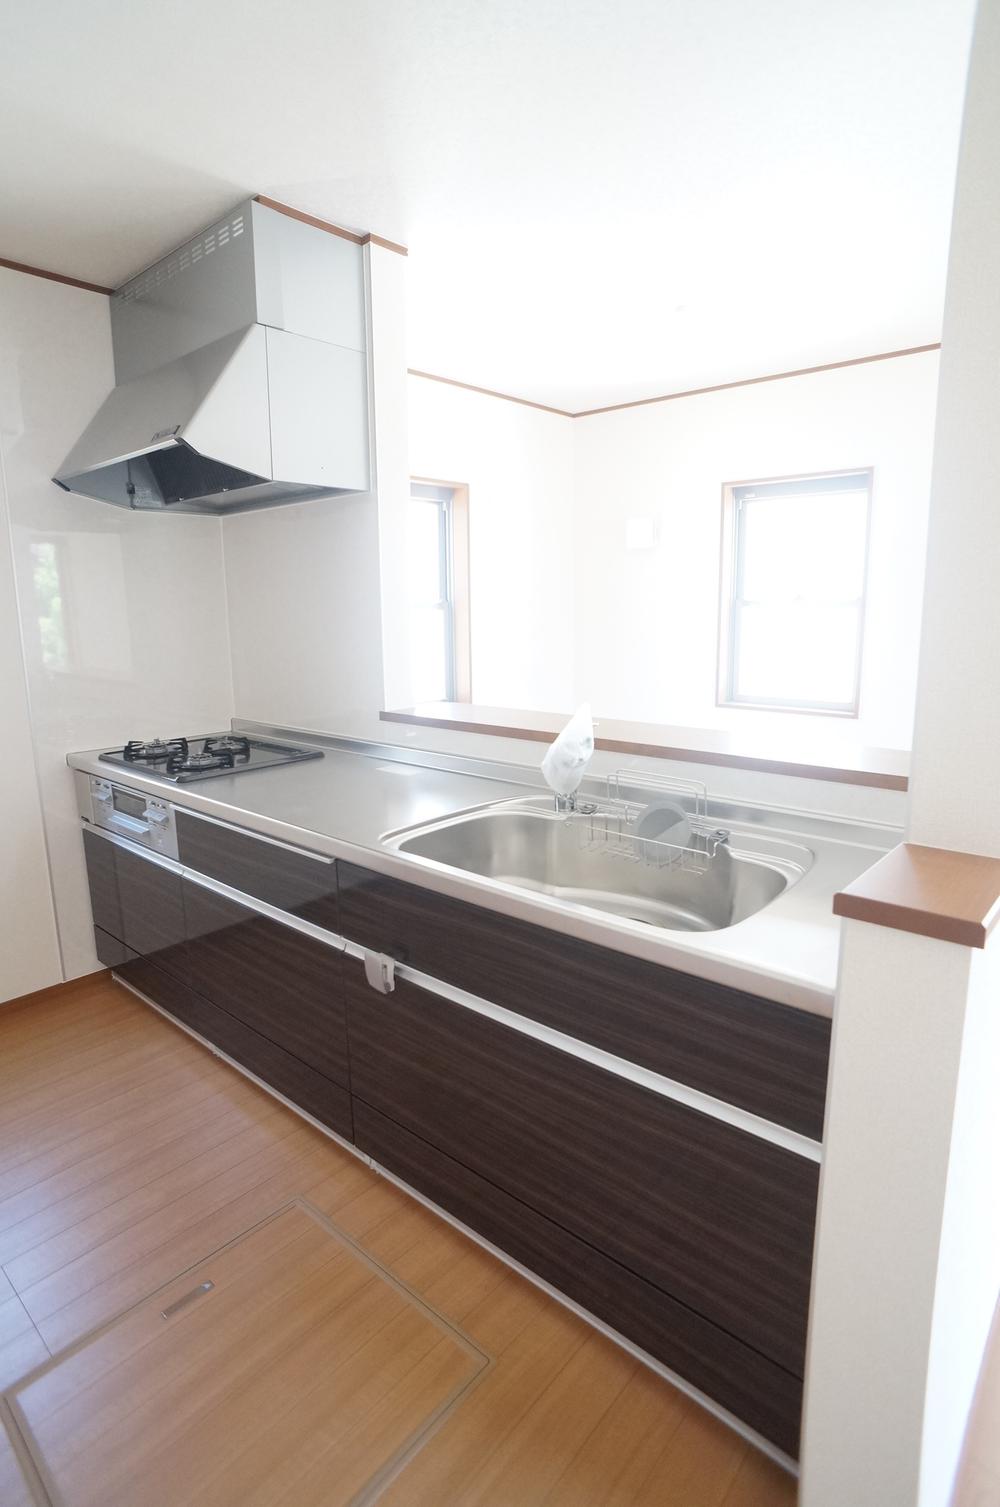 Same specifications photo (kitchen).  ◆ Construction example photo ◆